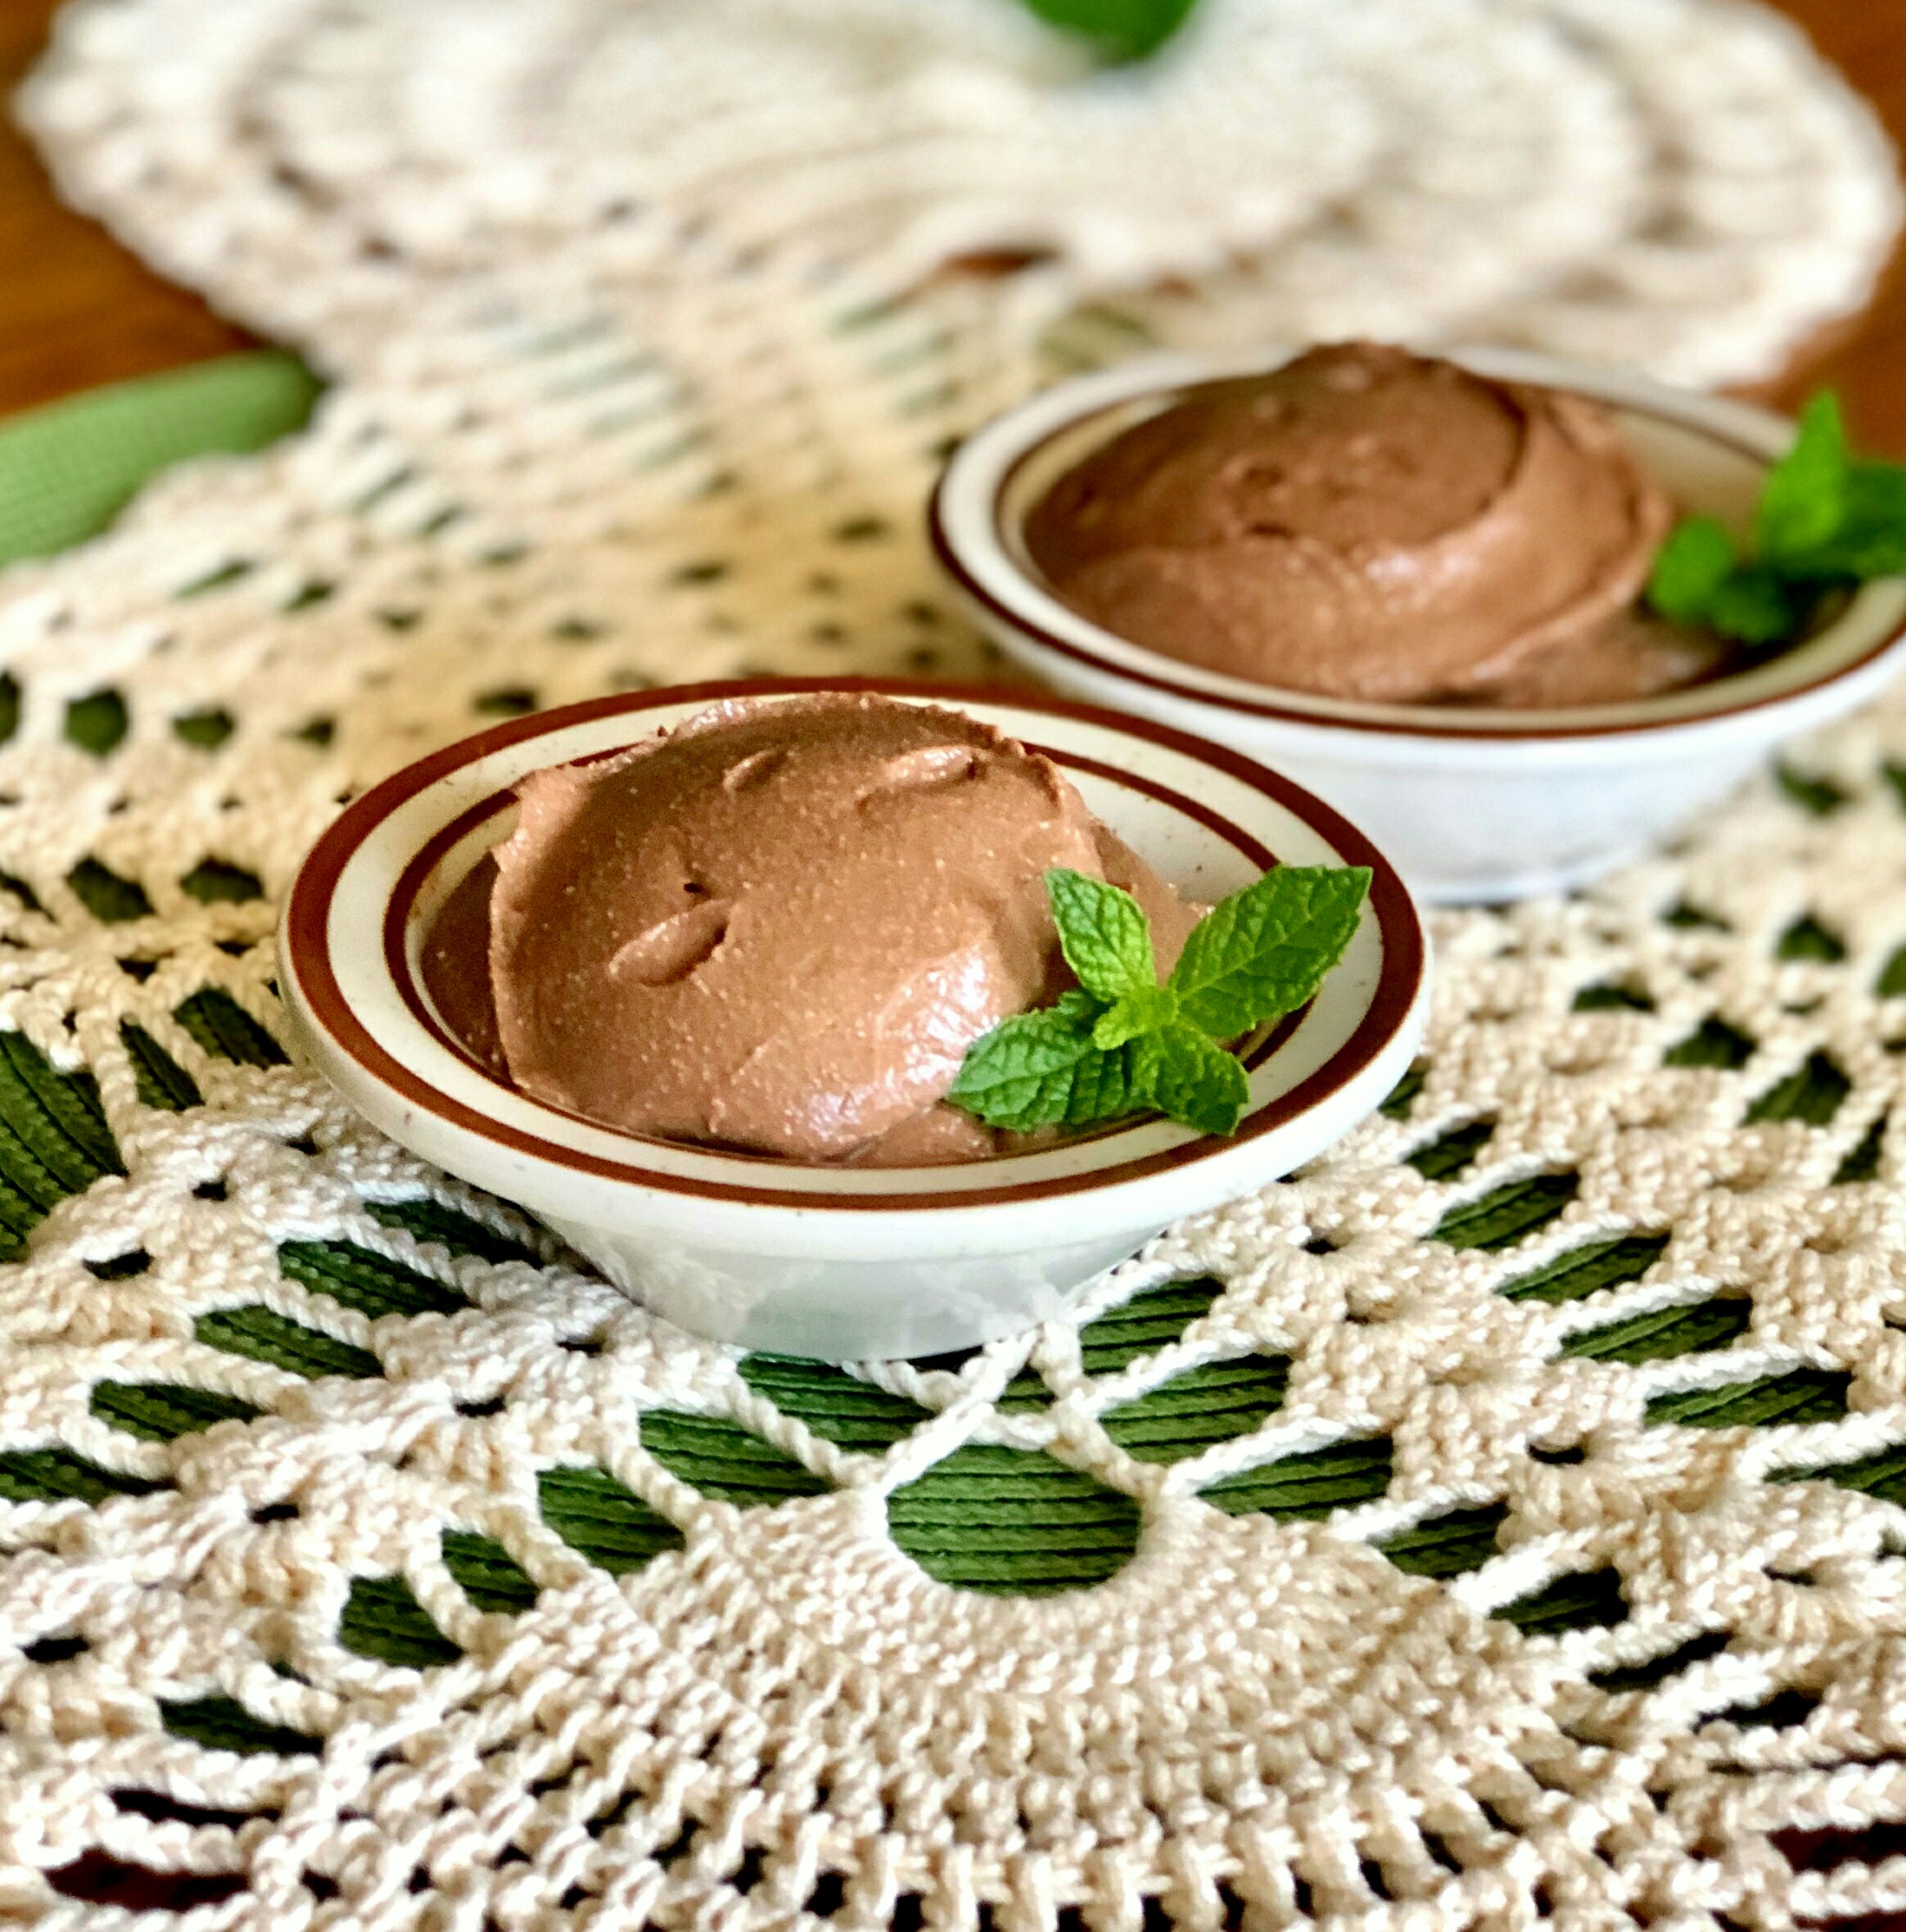 Whipped Peanut Butter-Chocolate Ricotta Pudding Yoly